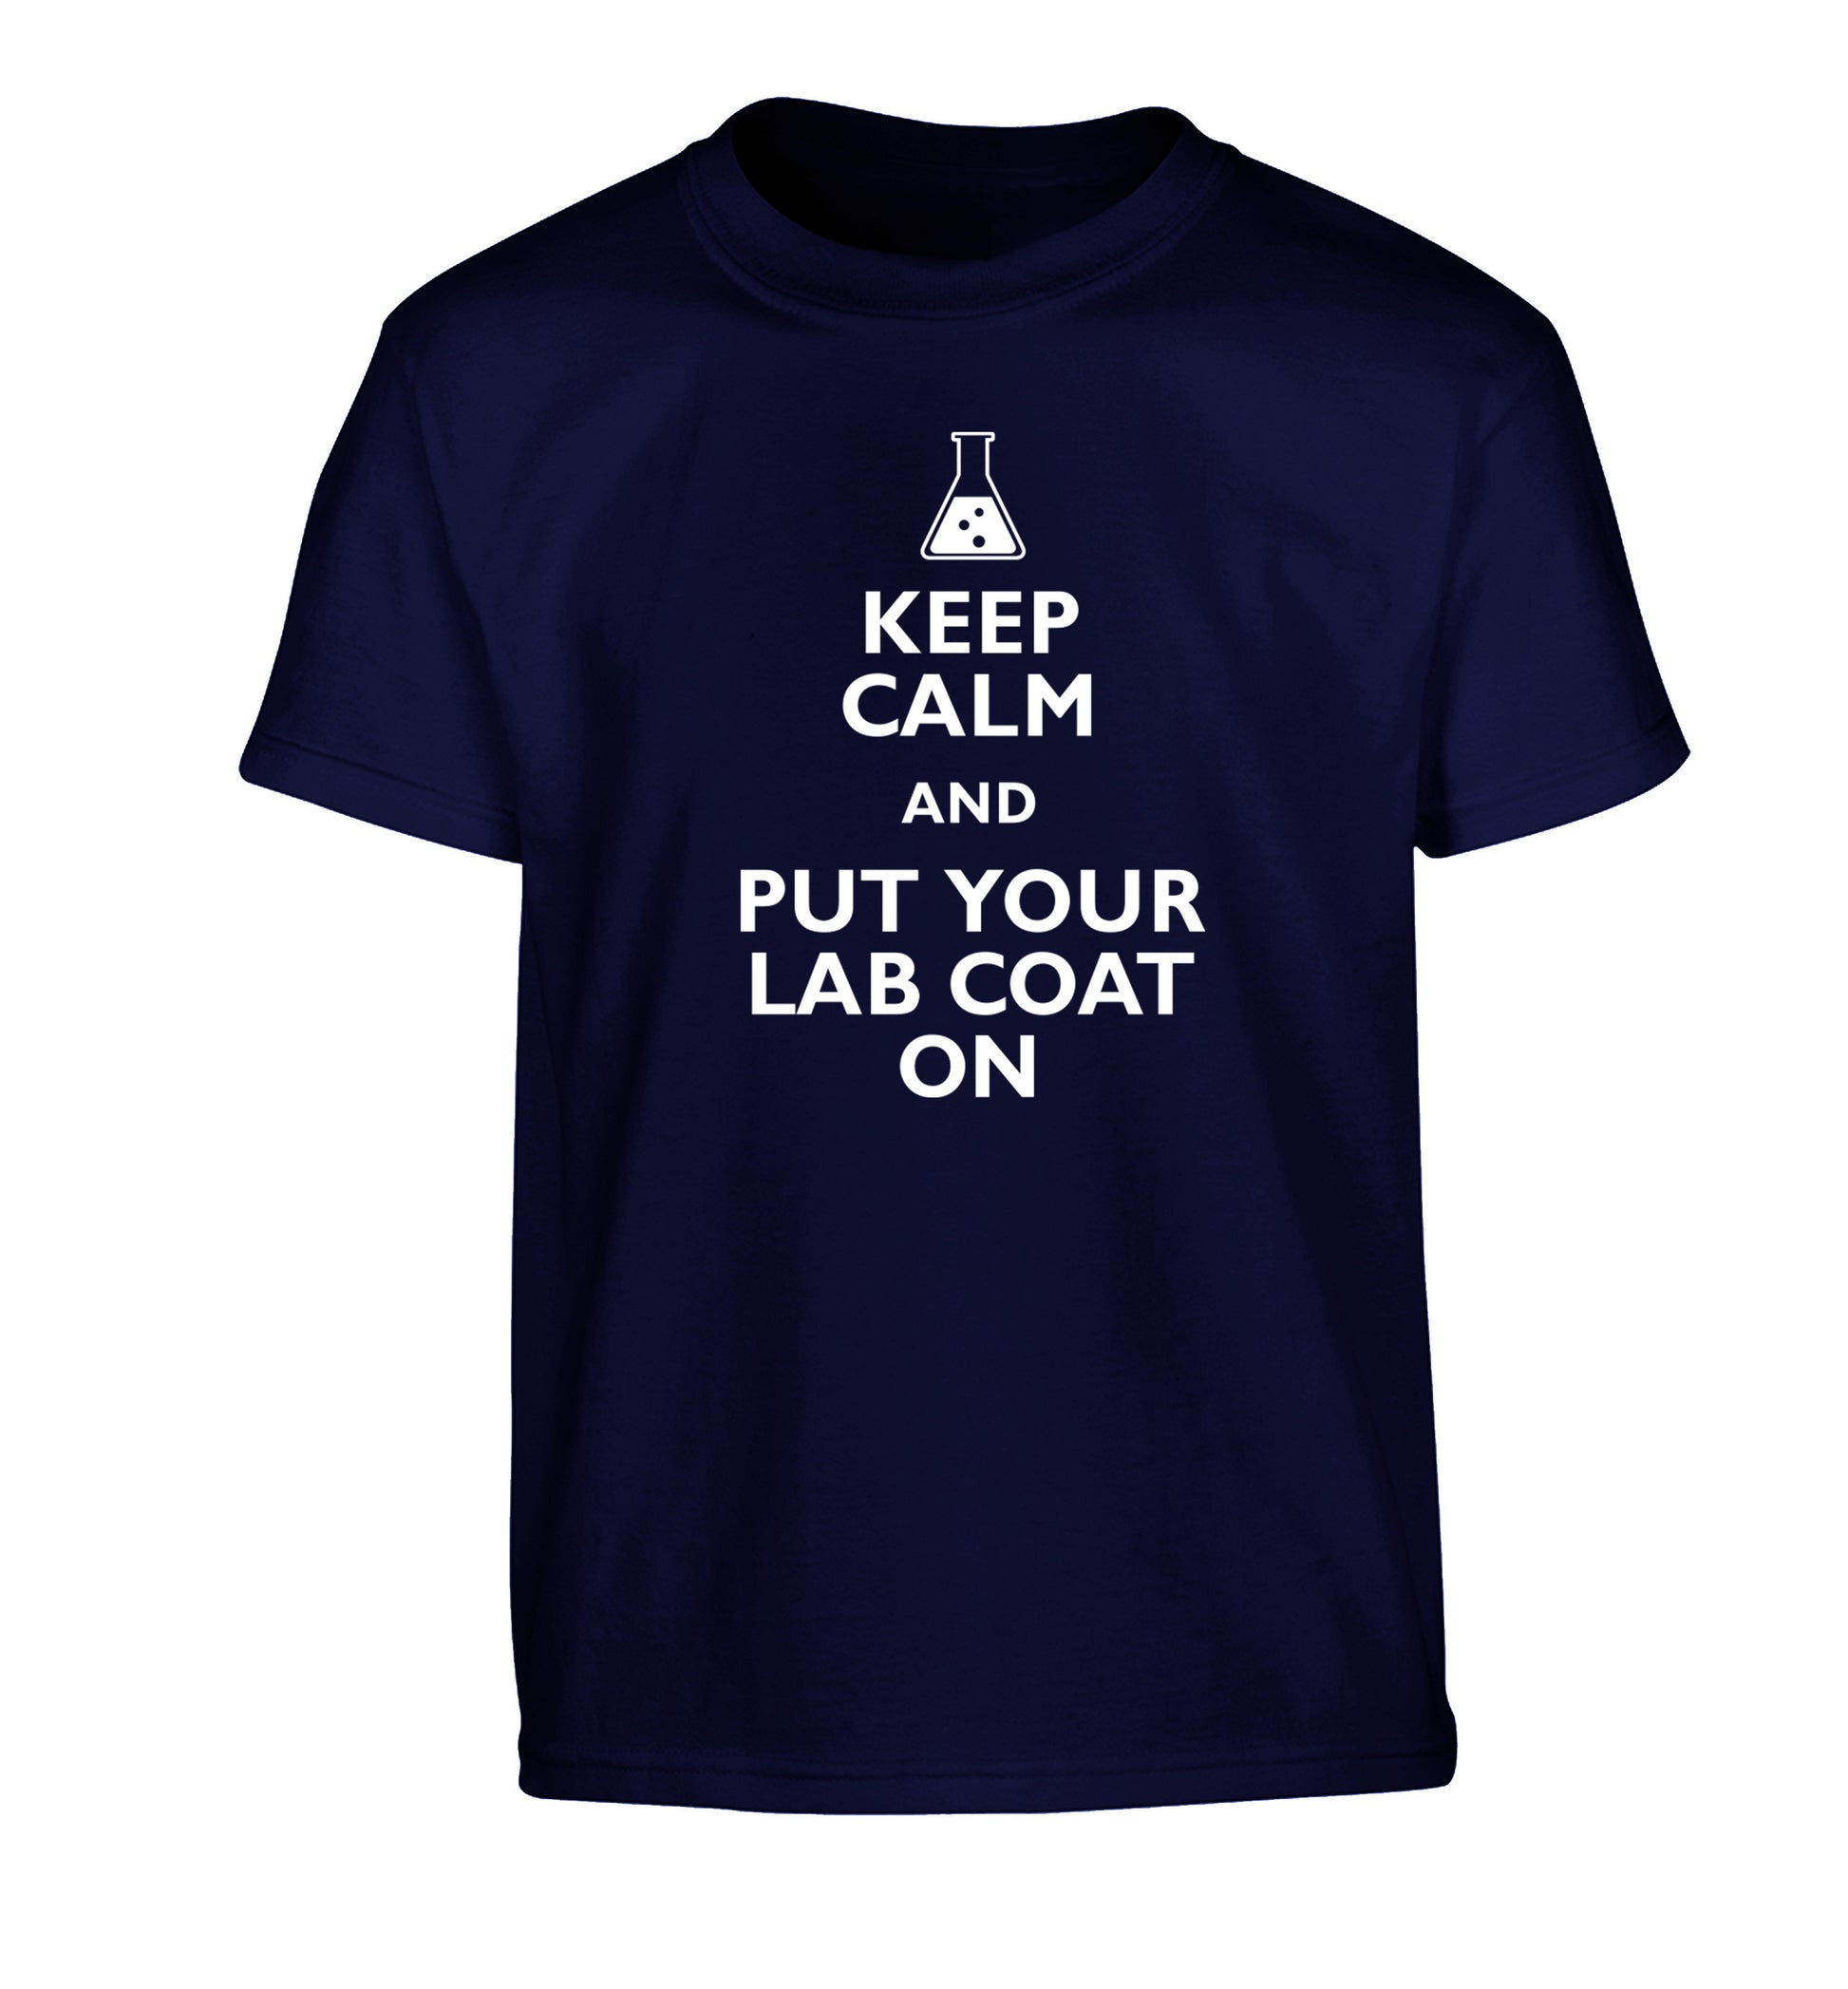 Keep calm and put your lab coat on Children's navy Tshirt 12-14 Years